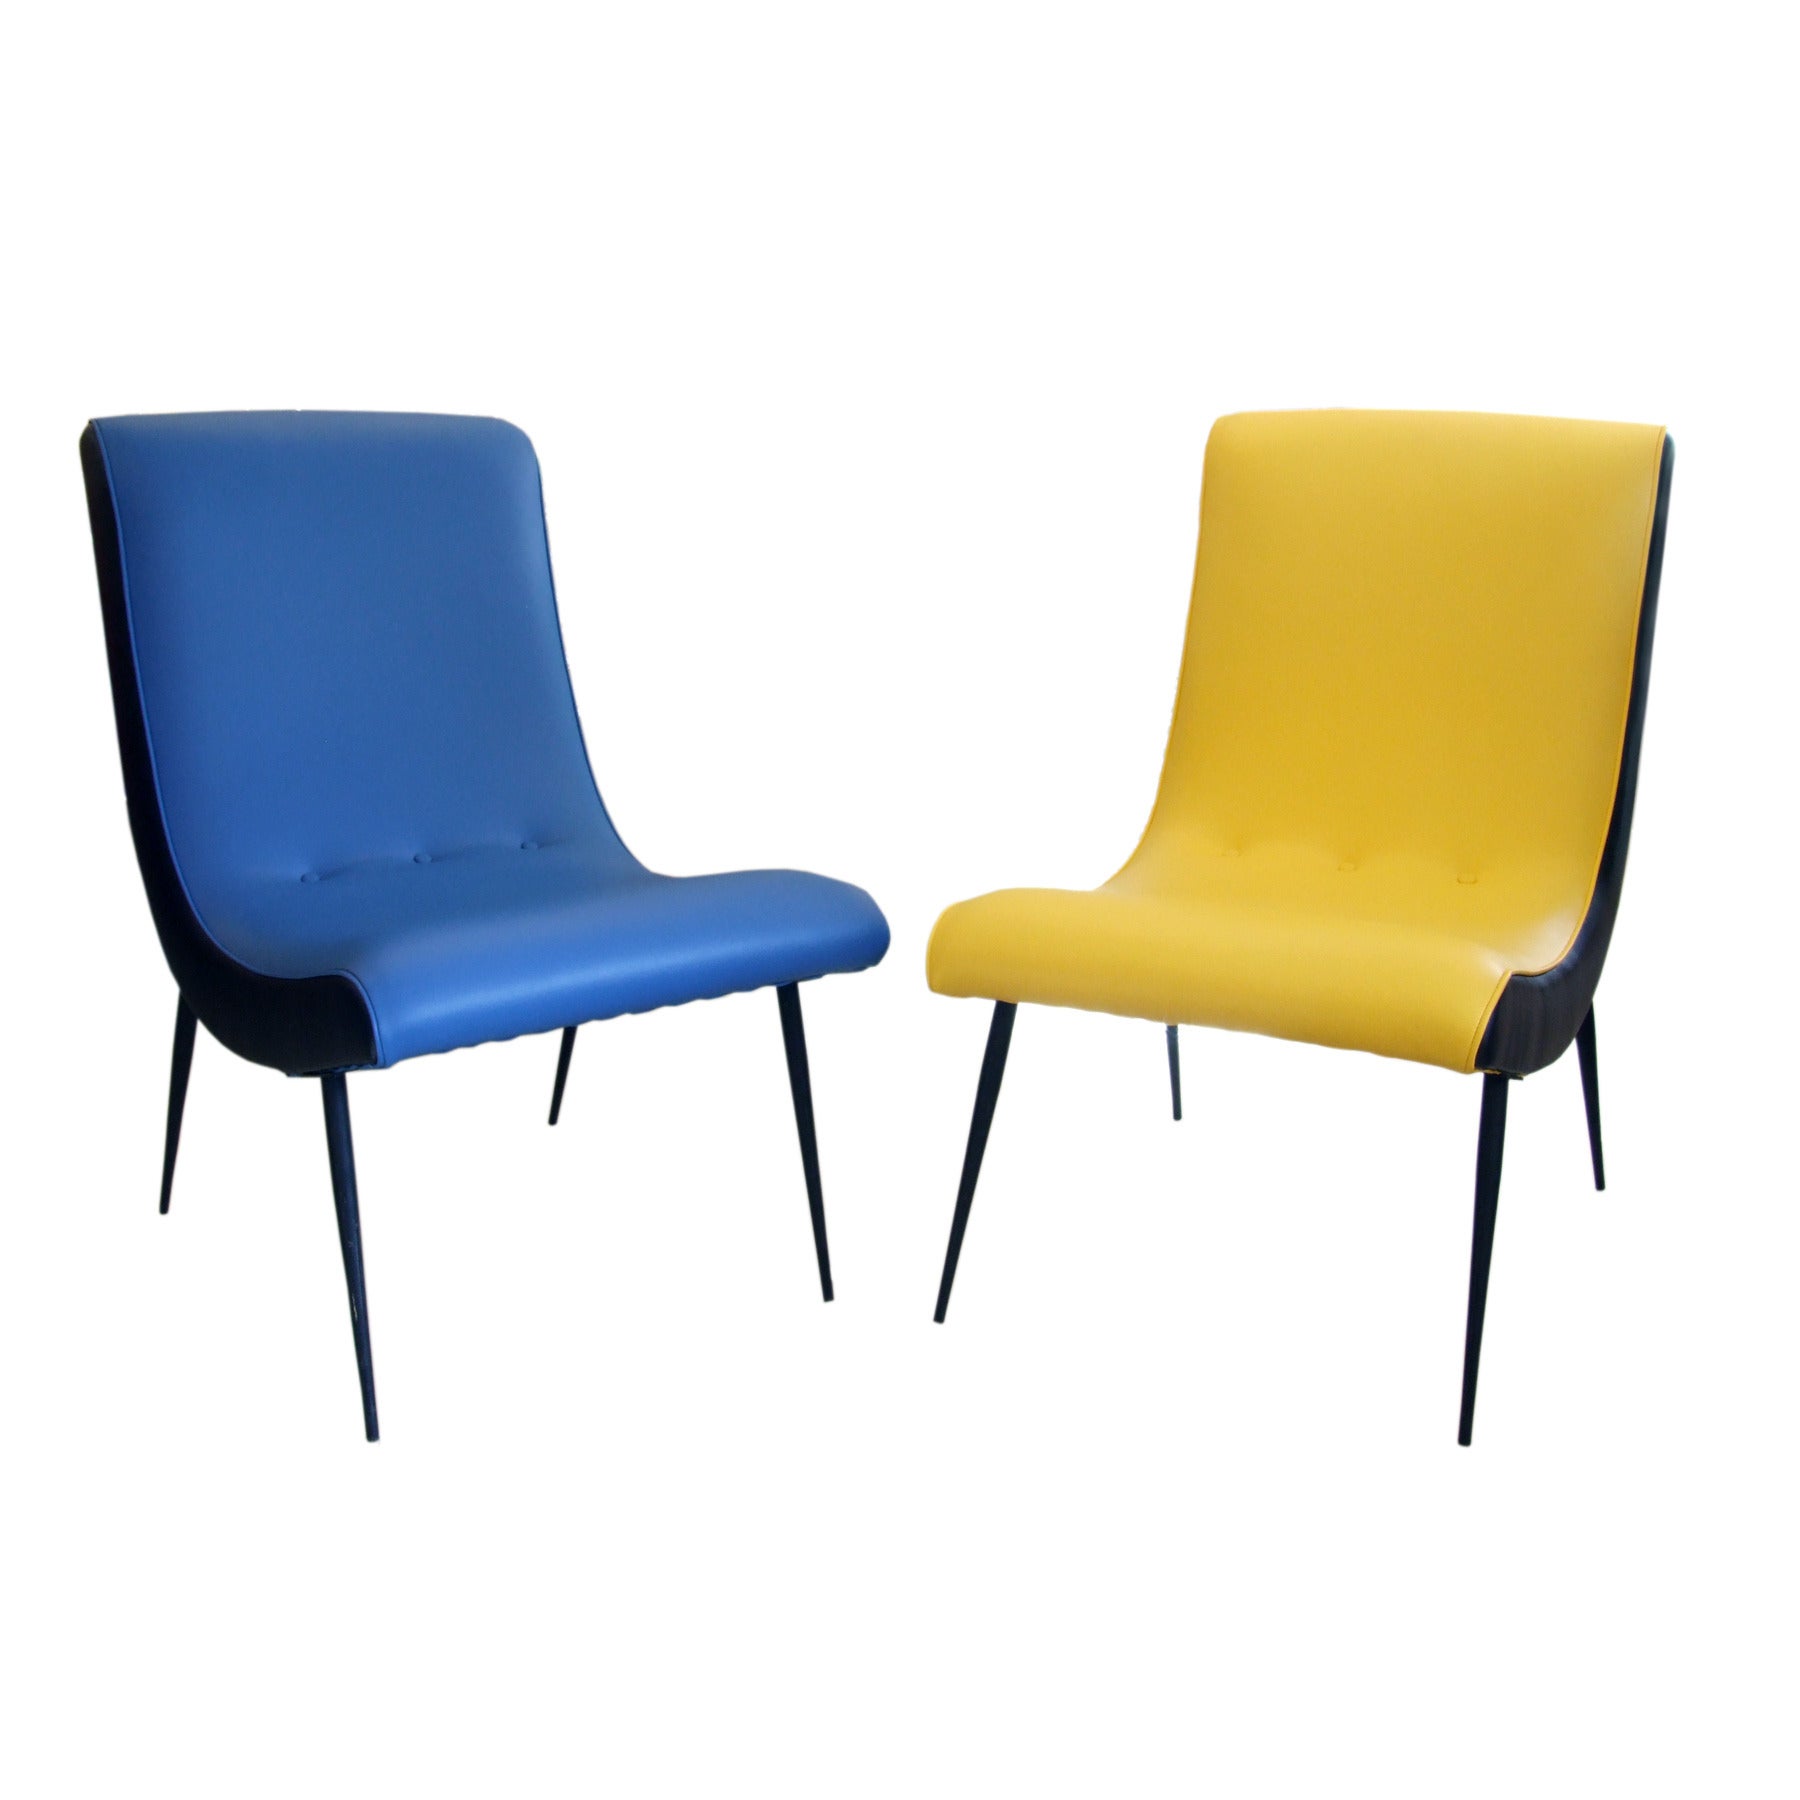 A Pair Of Italian Mid Century Lounge Chairs For Sale